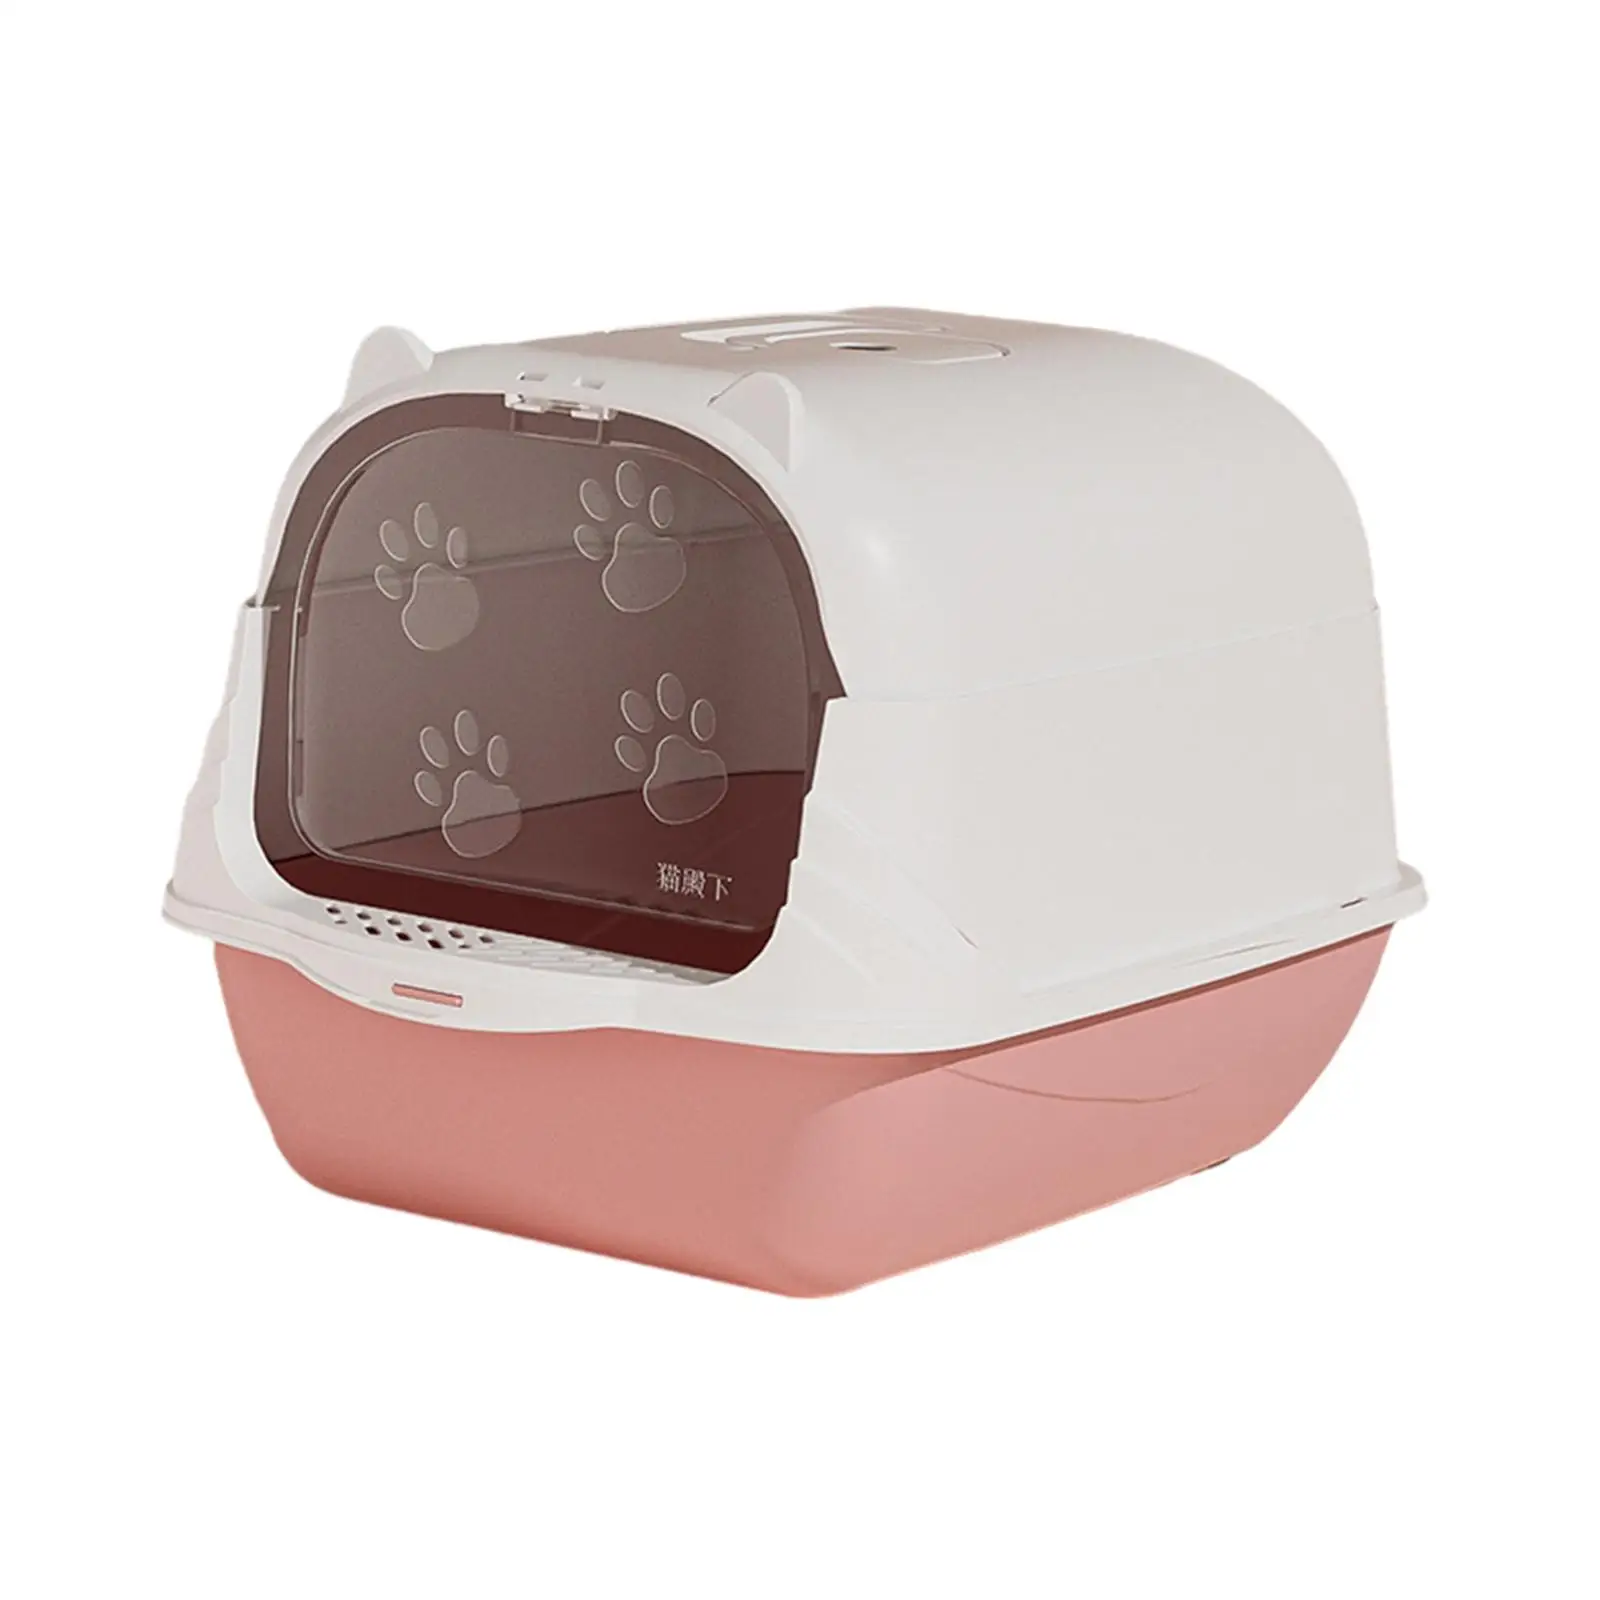 Hooded Cat Litter Box with Lid Enclosed Cat Toilet Kitty Litter Tray Portable with Front Door Flap Kitten Potty Pet Supplies